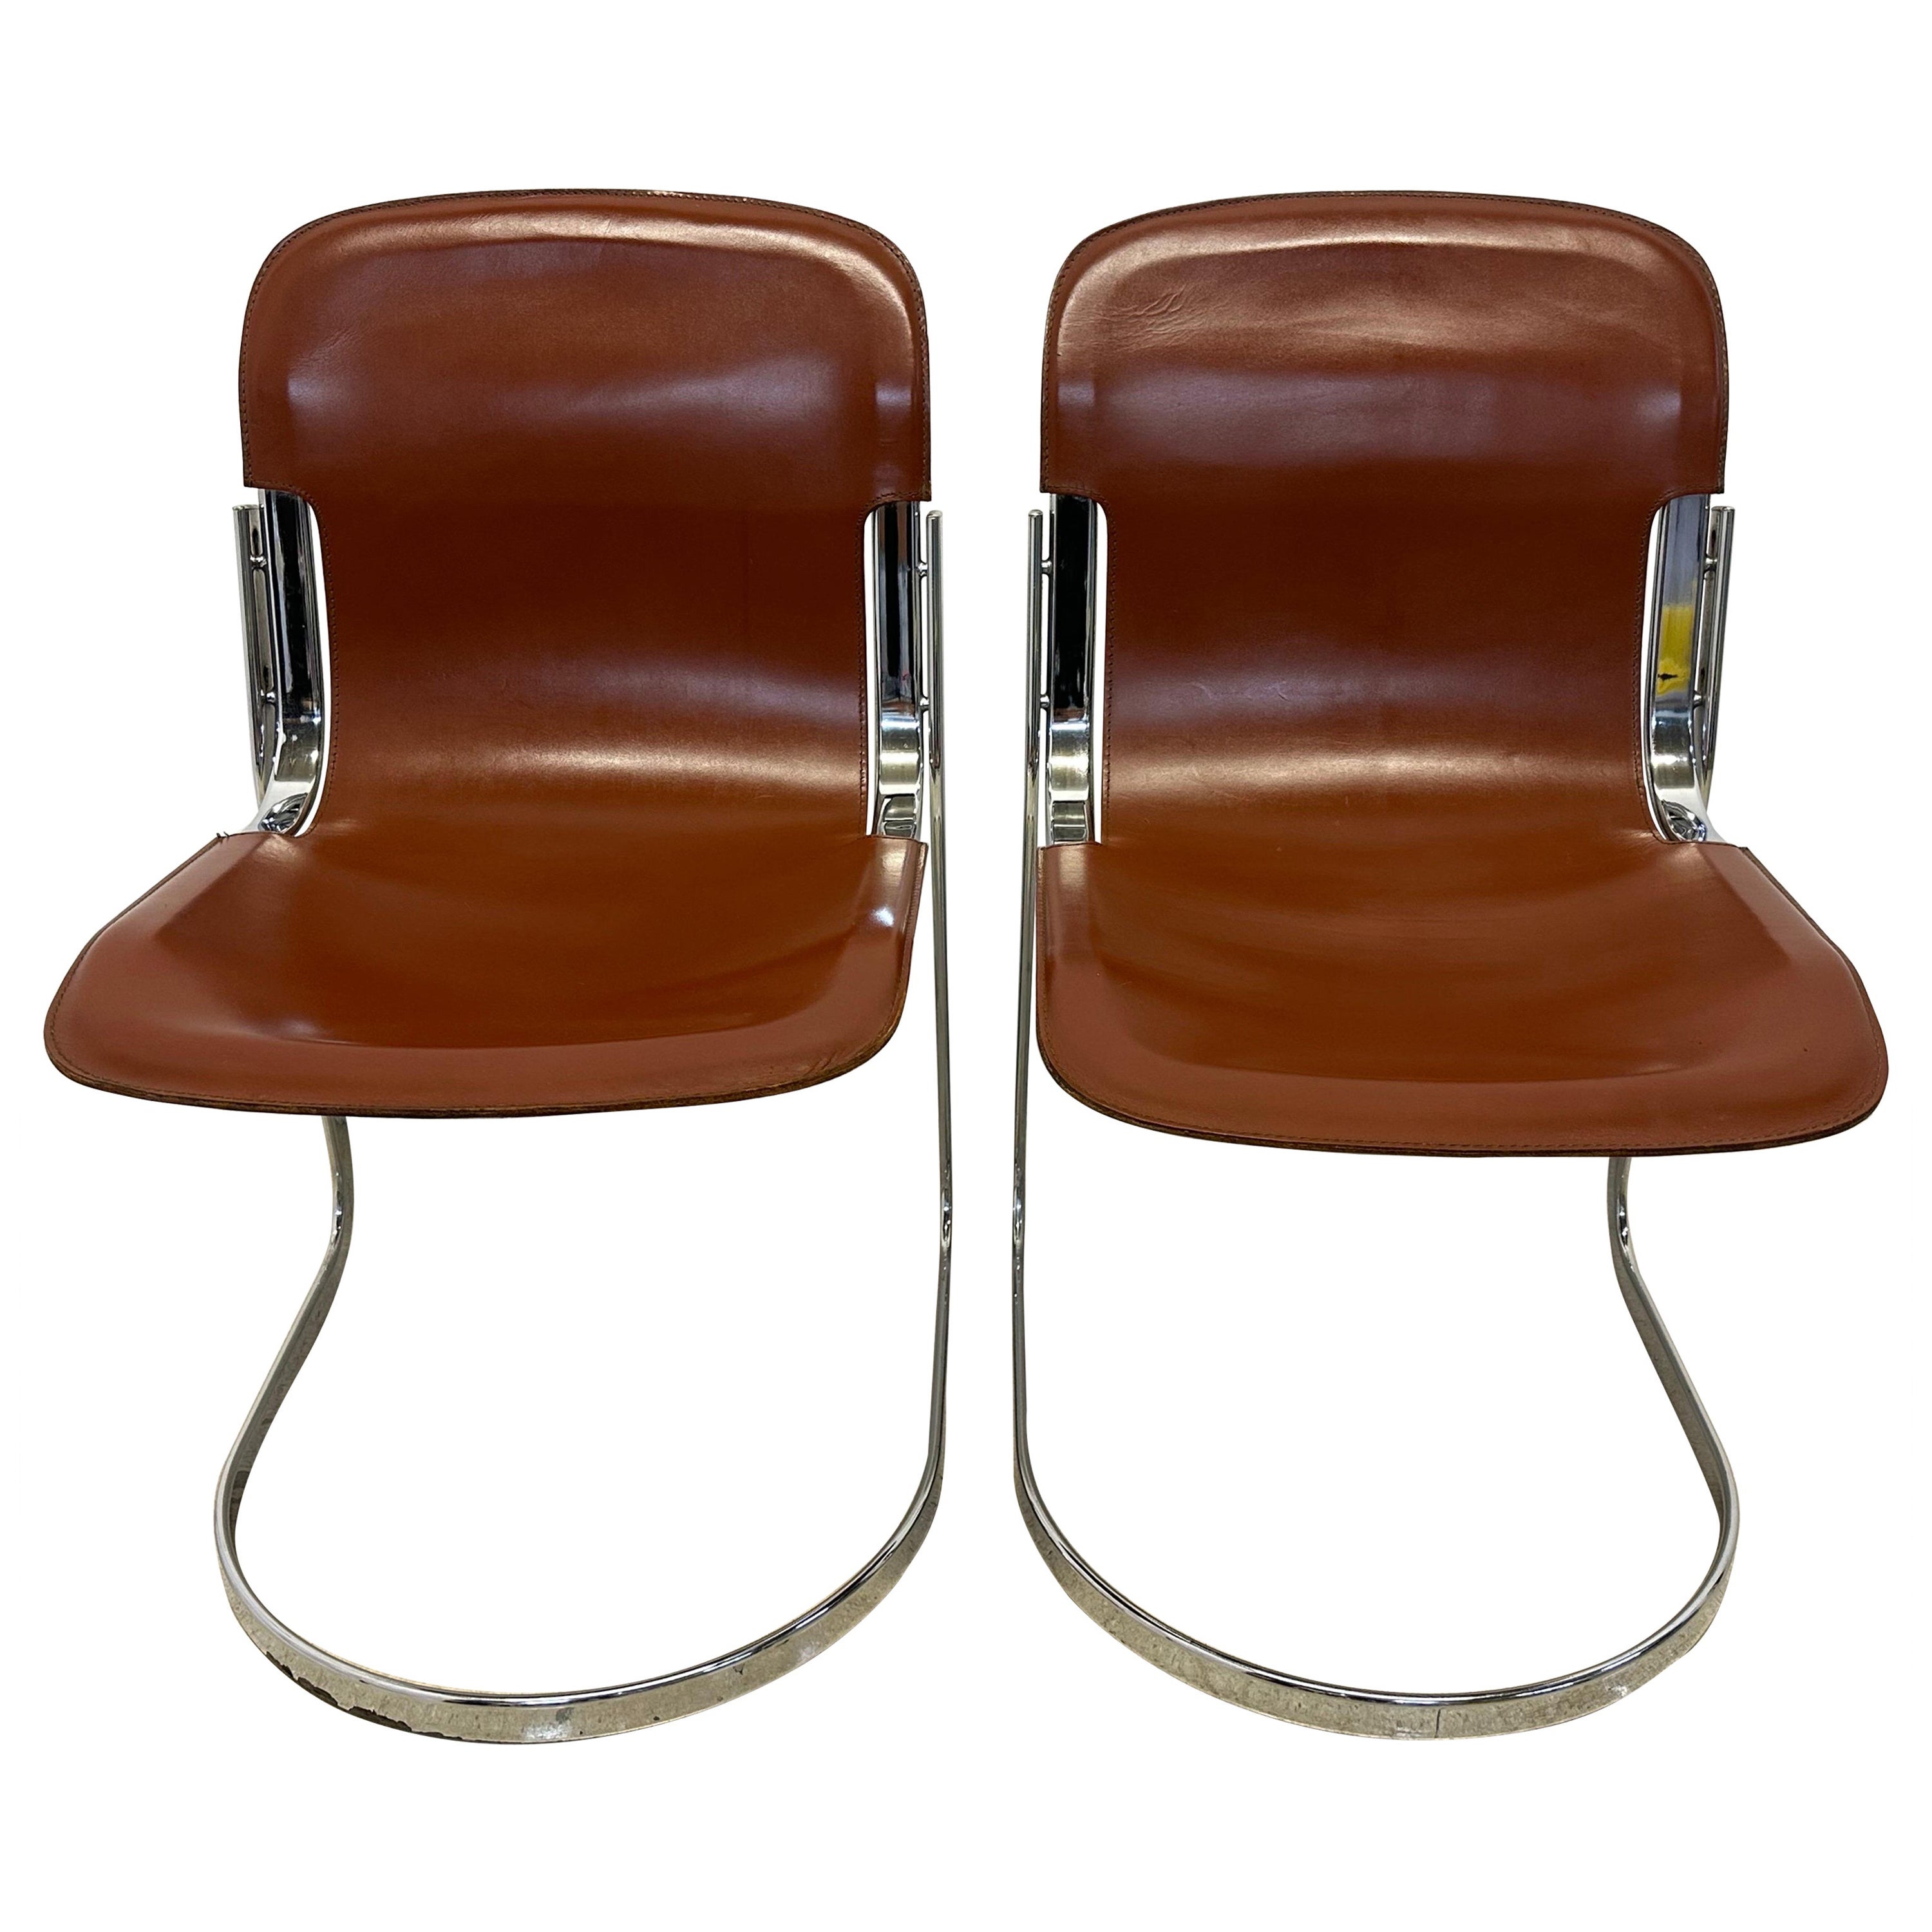 Willow Rizzo Cantilevered Leather and Chrome Dining Chairs for Cidue - a Pair